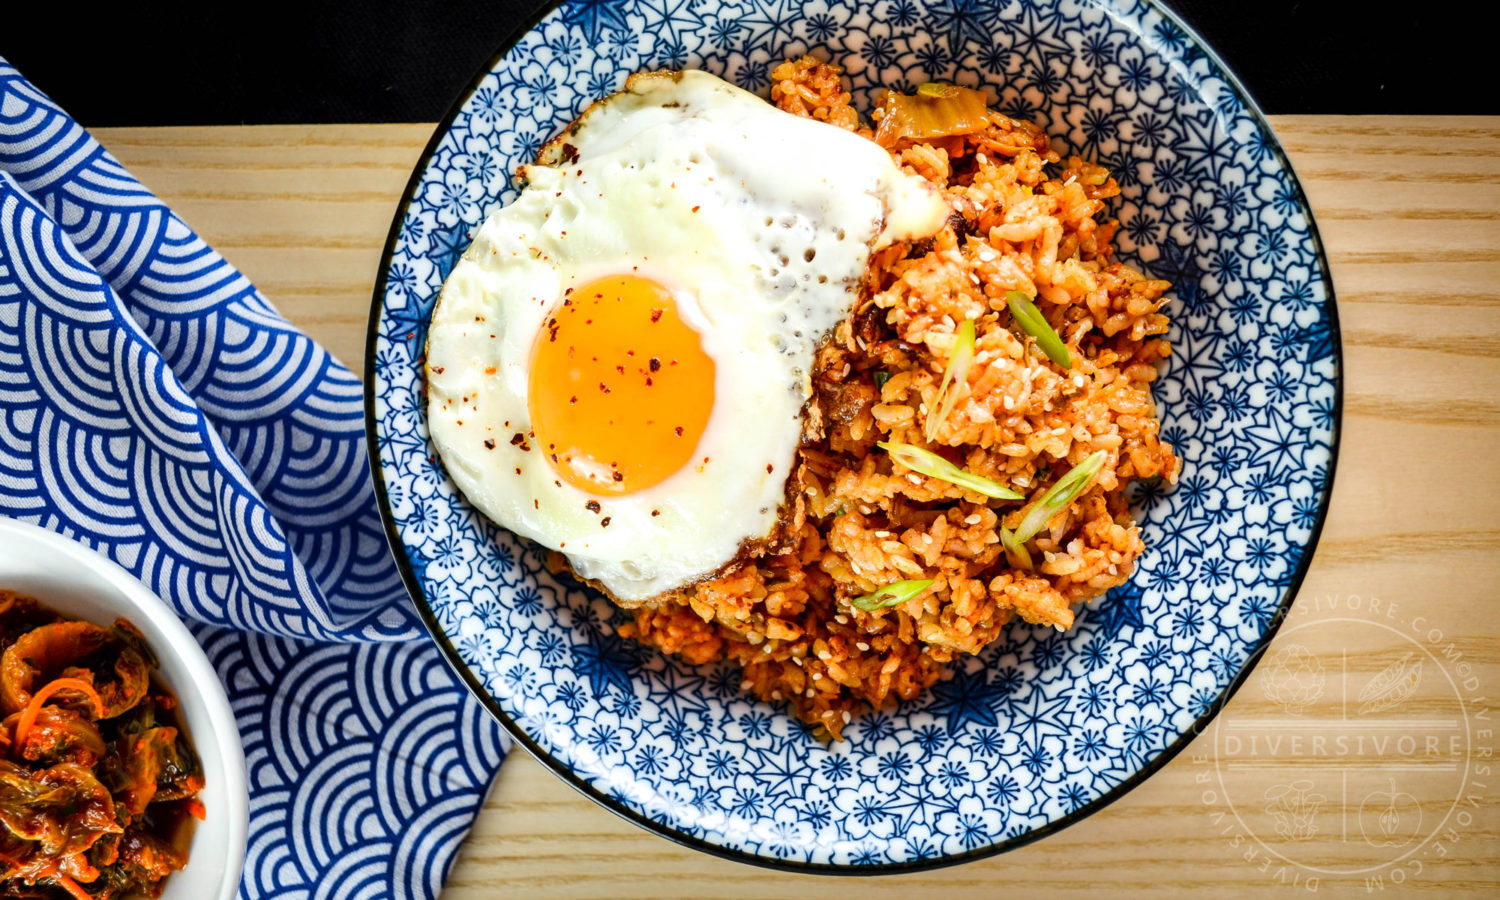 Kimchi Fried Rice (Kimchi Bokkeumbap) - spicy, simple, and oh-so-delicious Korean food - Diversivore.com